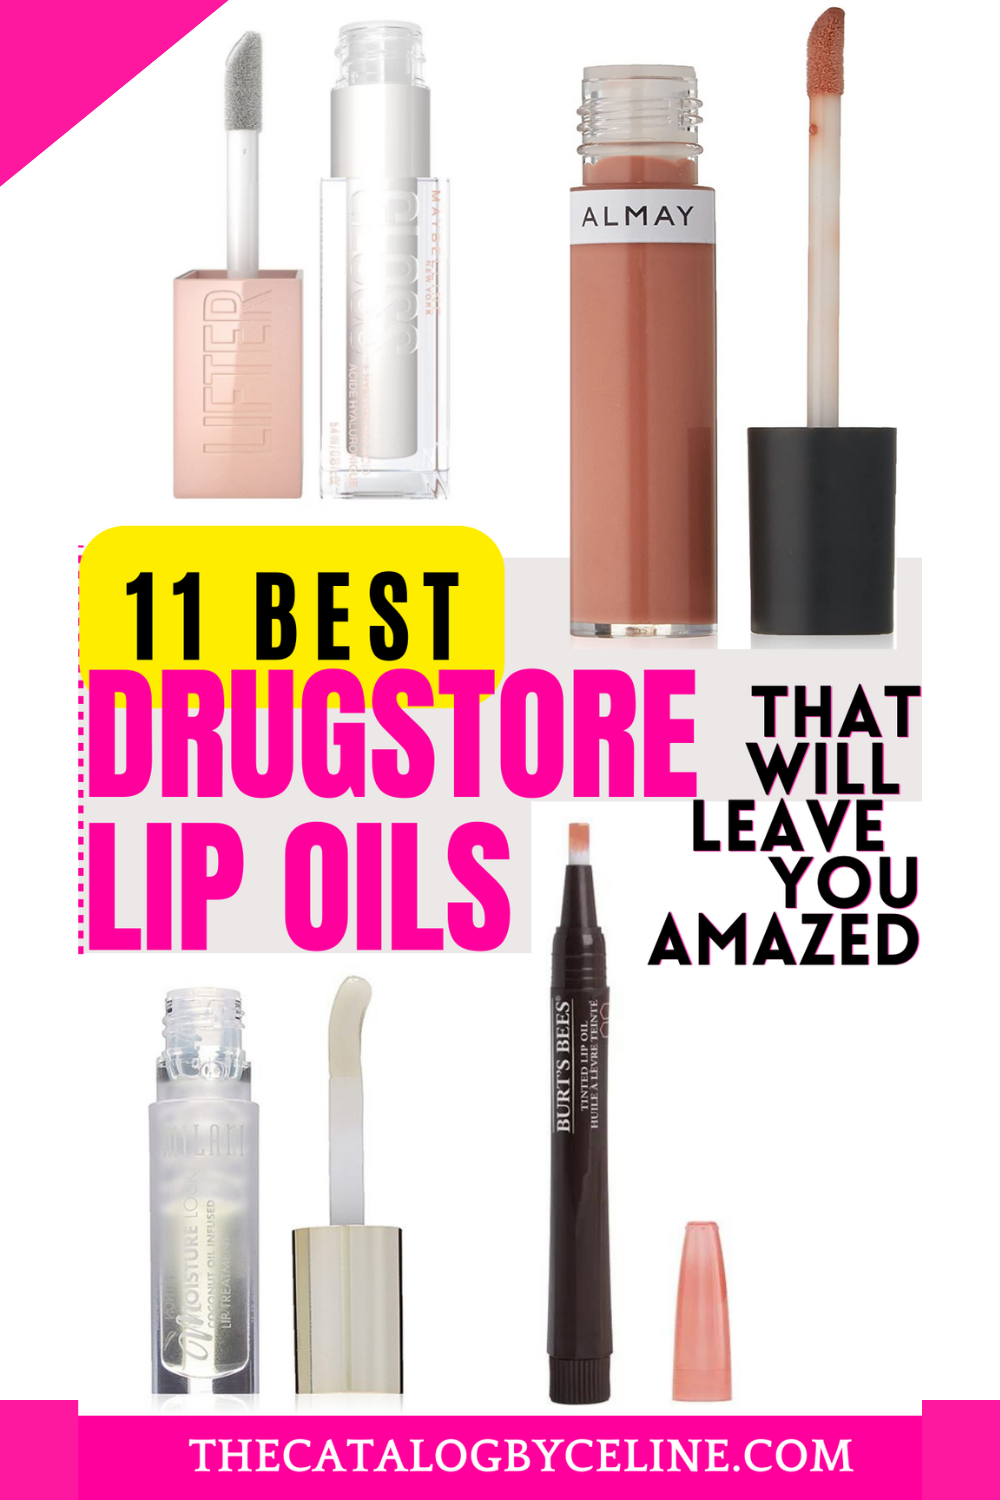 Get Your Gloss On: The 11 Best Drugstore Lip Oils That Will Leave You Amazed